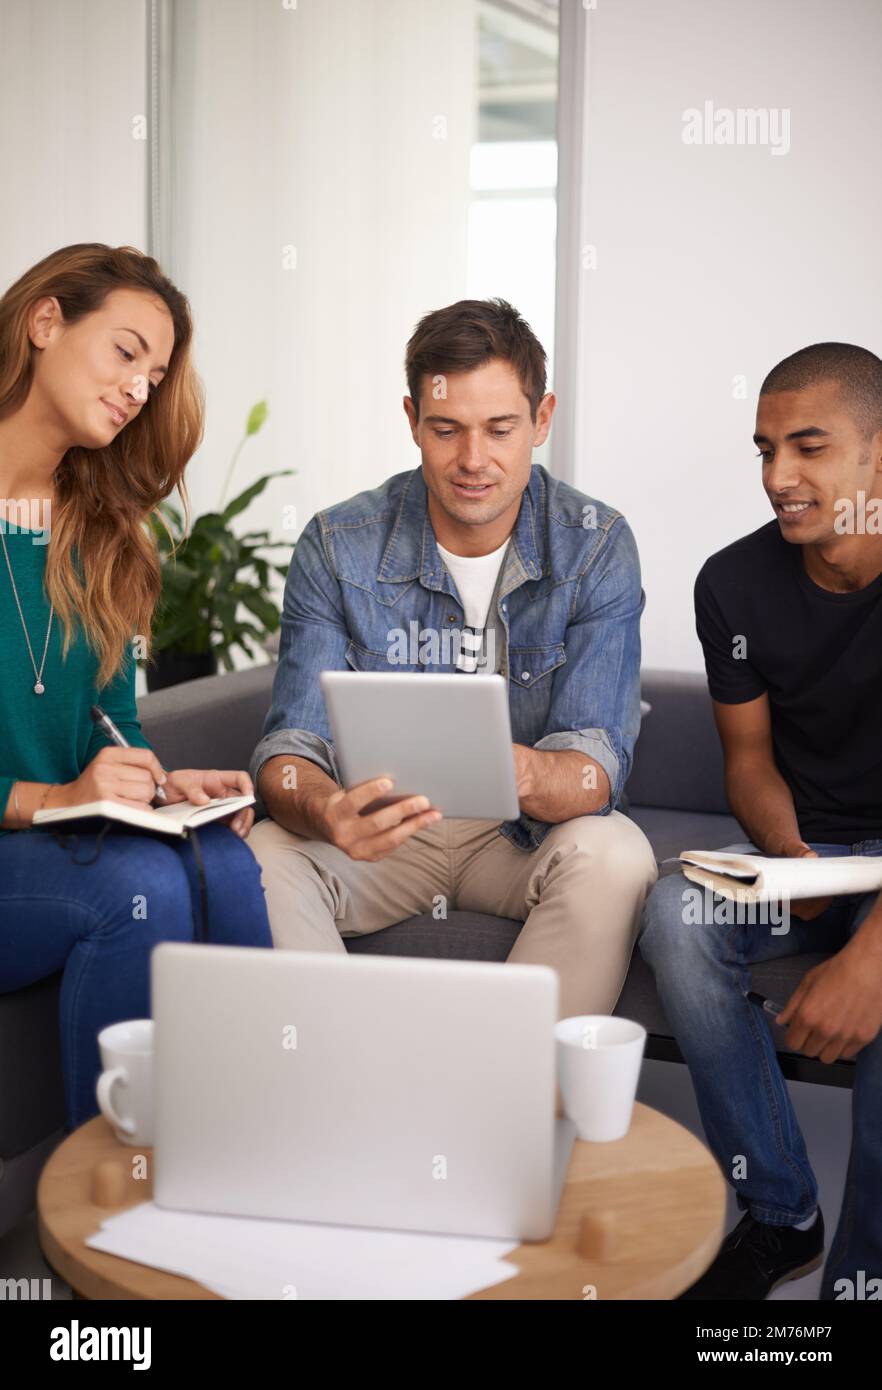 Taking notes. a team of young business professionals in an informal meeting. Stock Photo